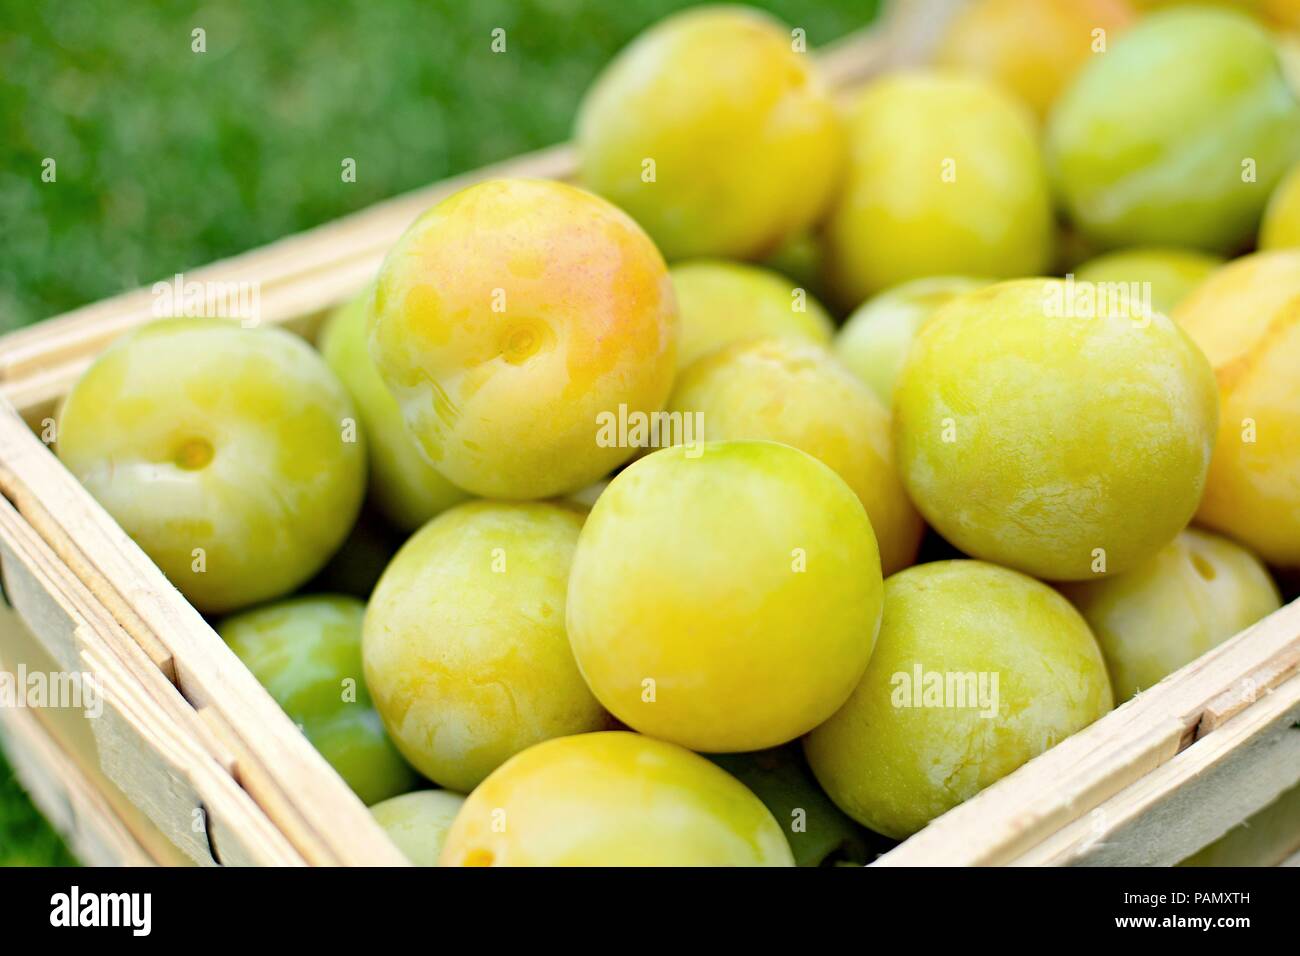 Basket full of the picked greengage or green plums on the ground in lawn. Stock Photo